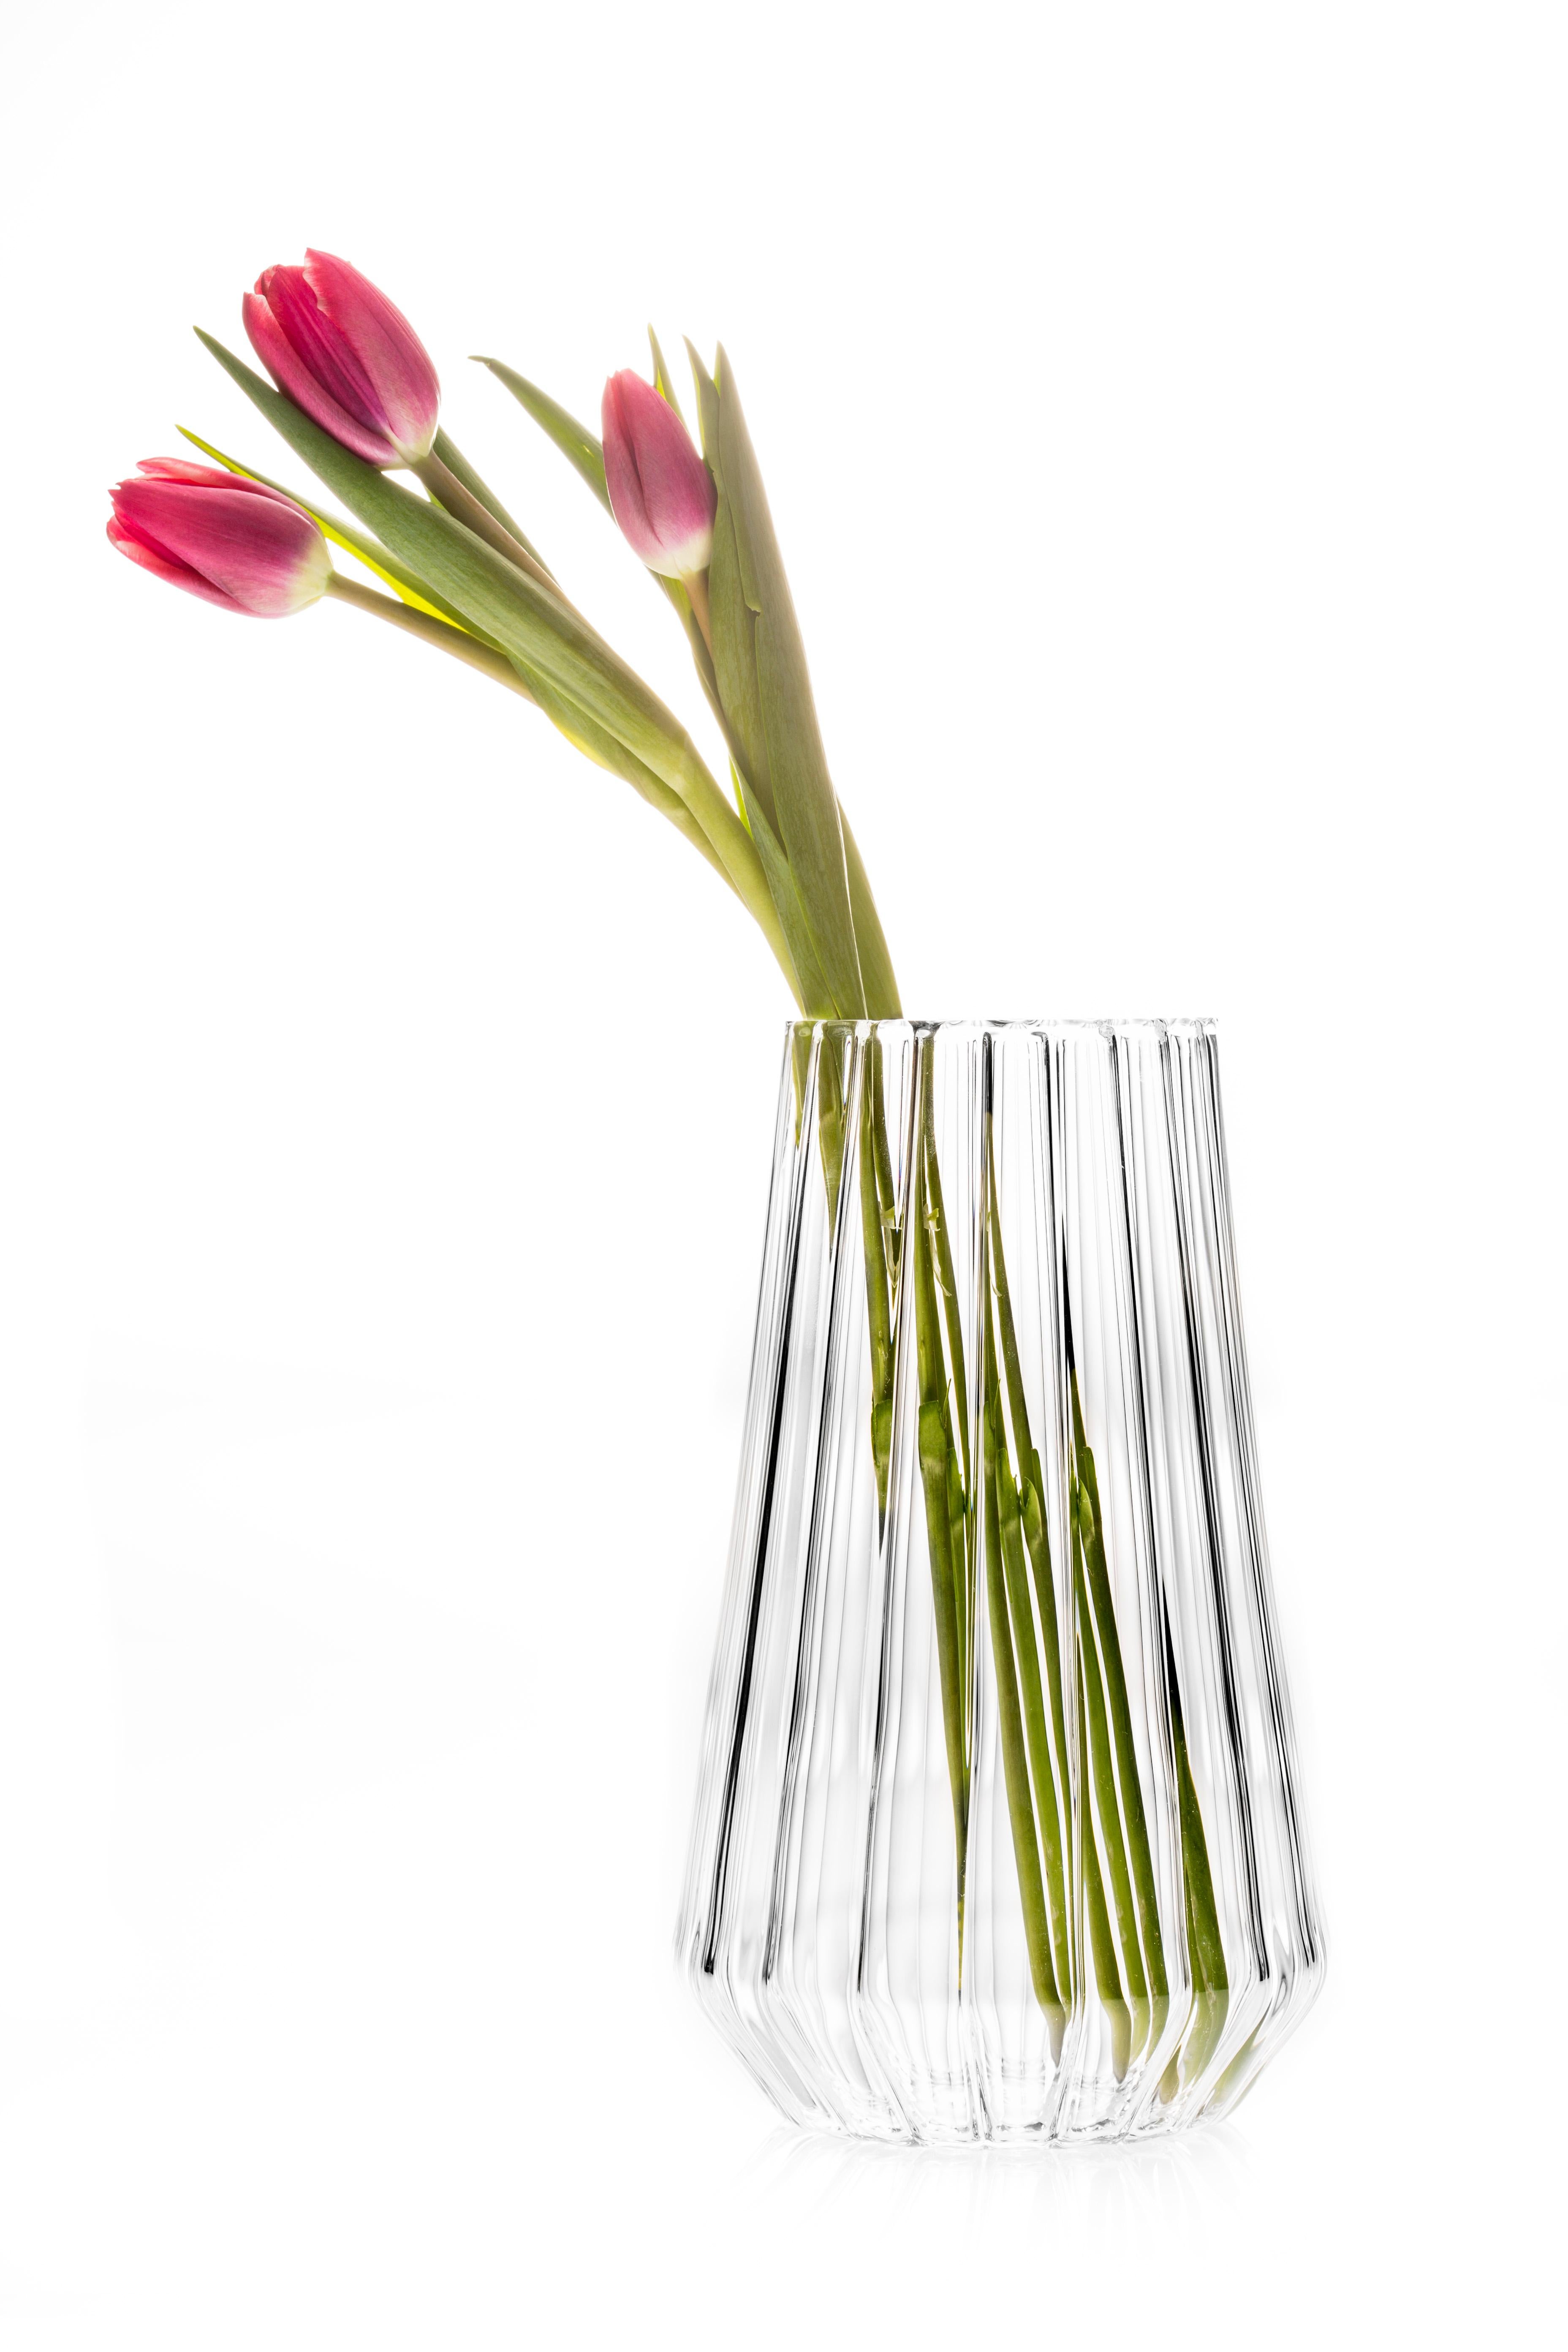 STELLA MEDIUM

Pure in form, the lenticular effect of the fluted glass masks the stems and showcases the flower heads. The facet near the bottom serves as a marker for the water line and keeps
the visual effect of the vase is clean and minimal.

The